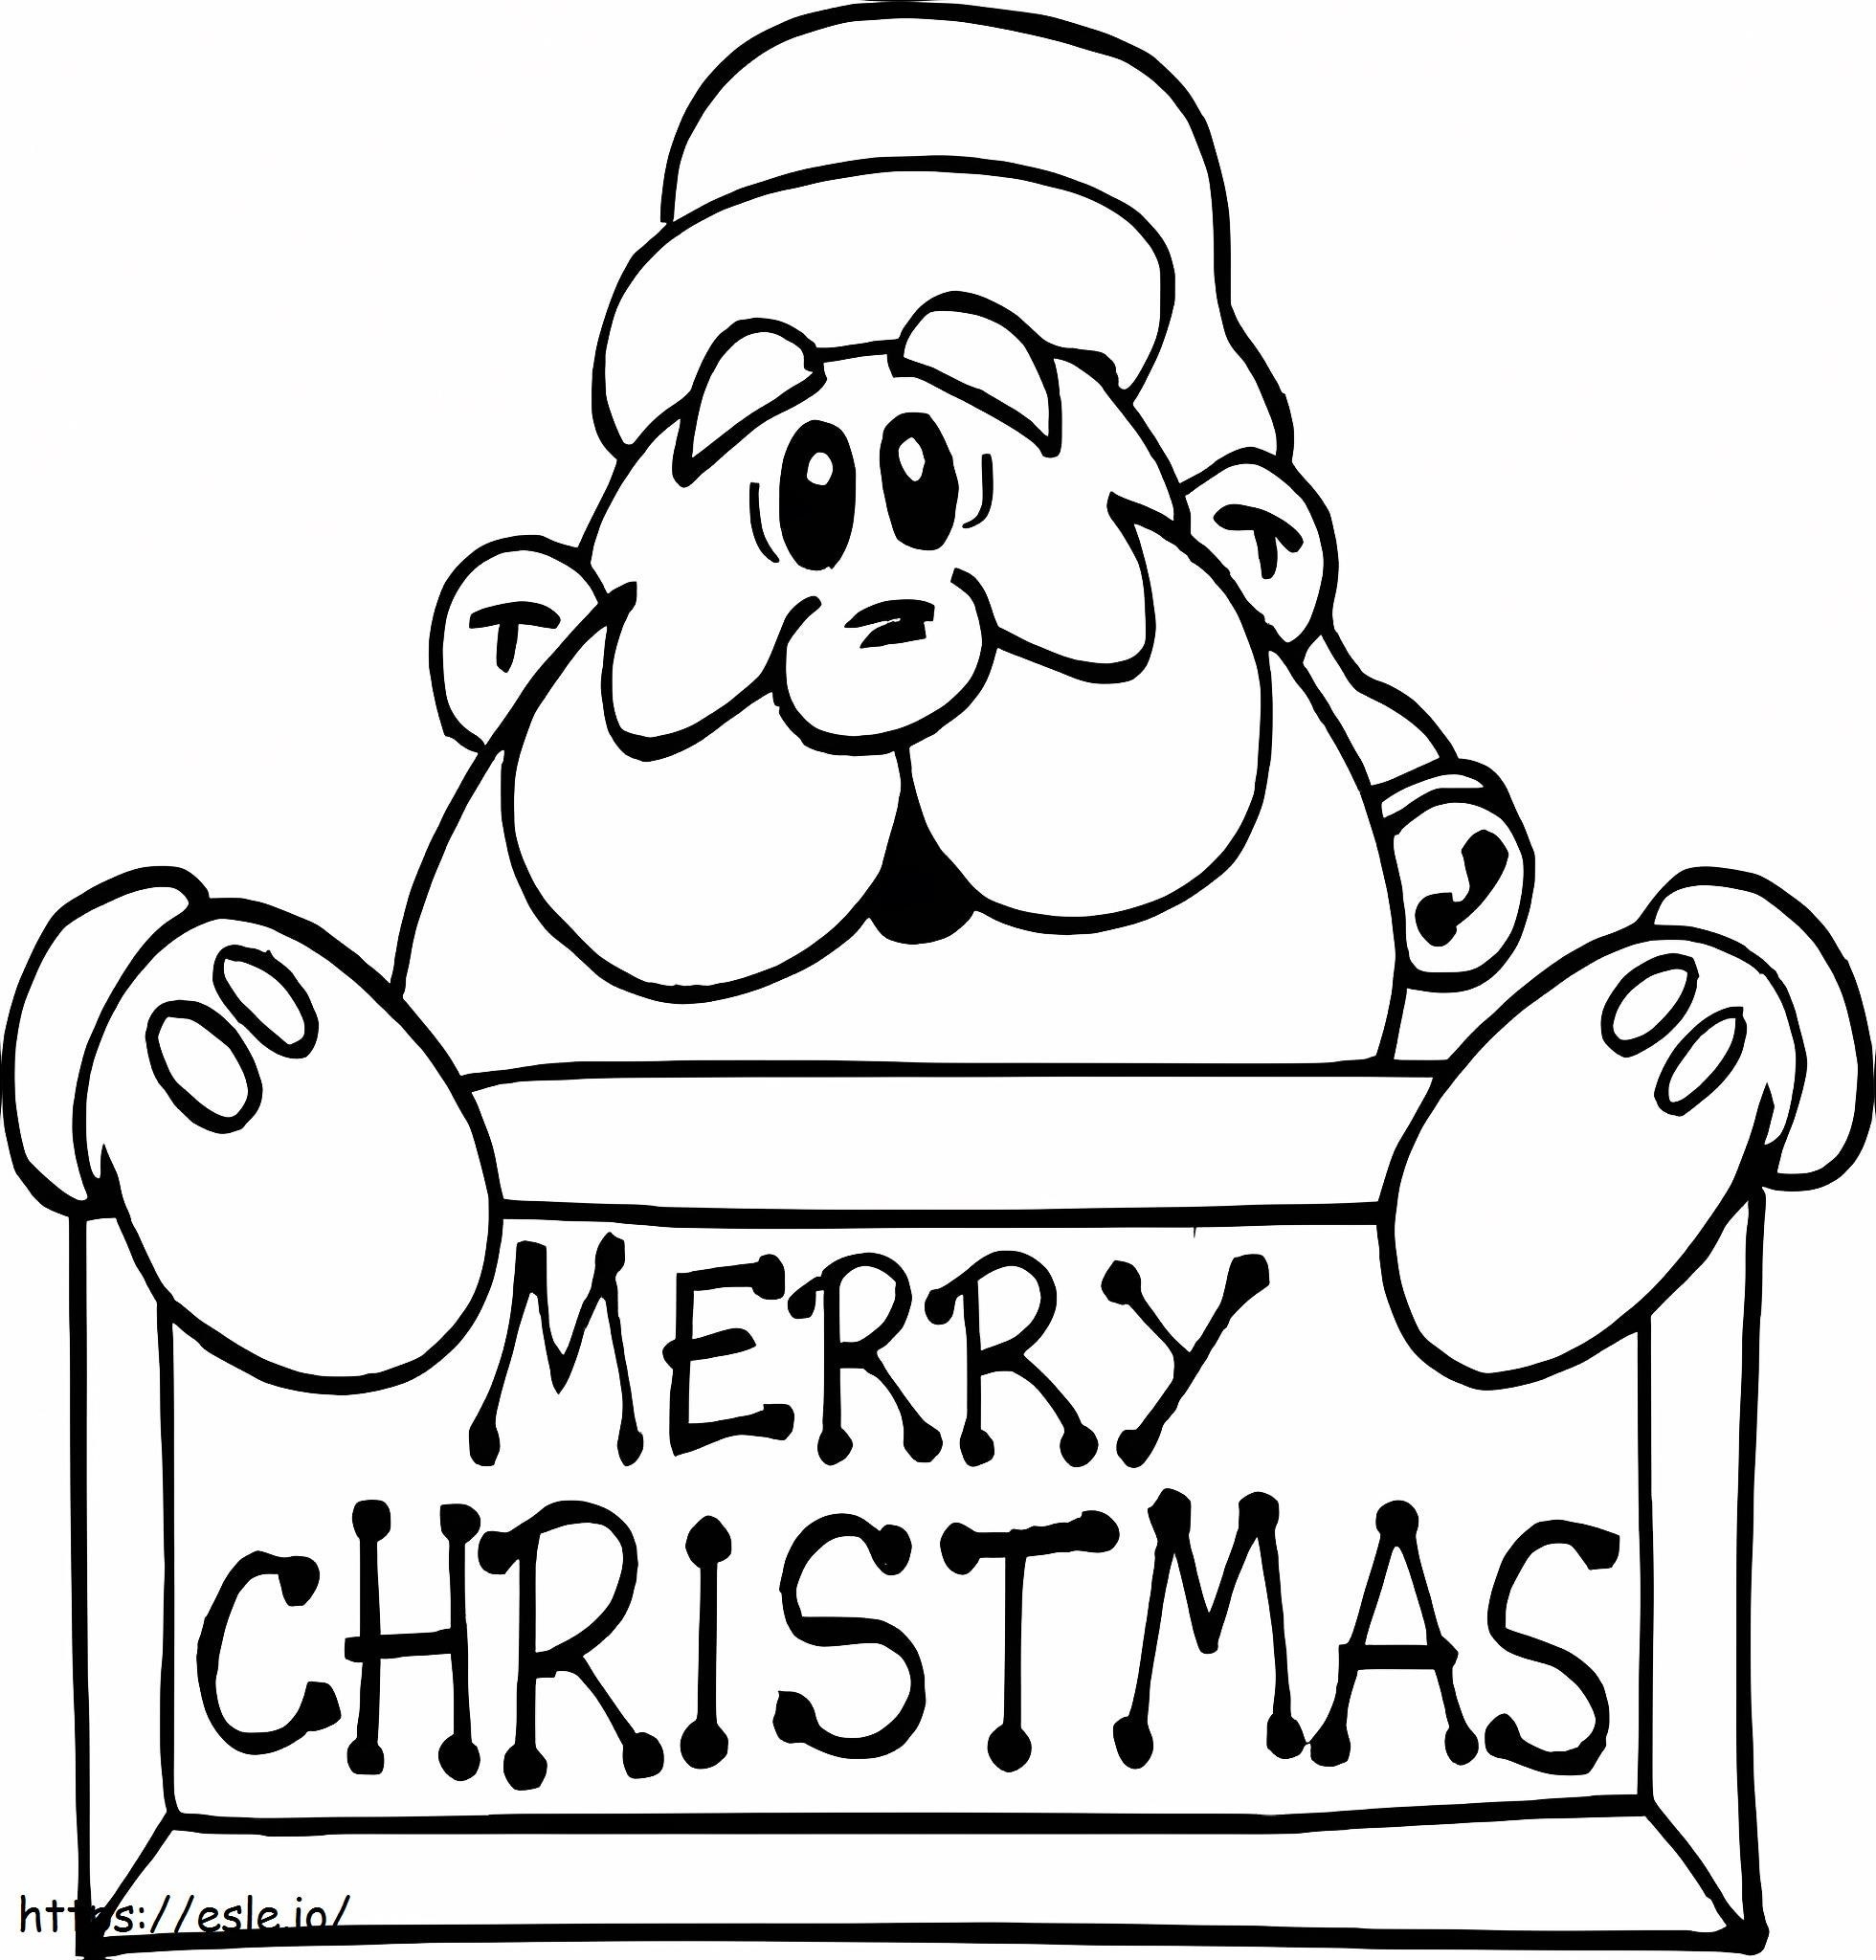 Santa Claus With Merry Christmas Banner coloring page